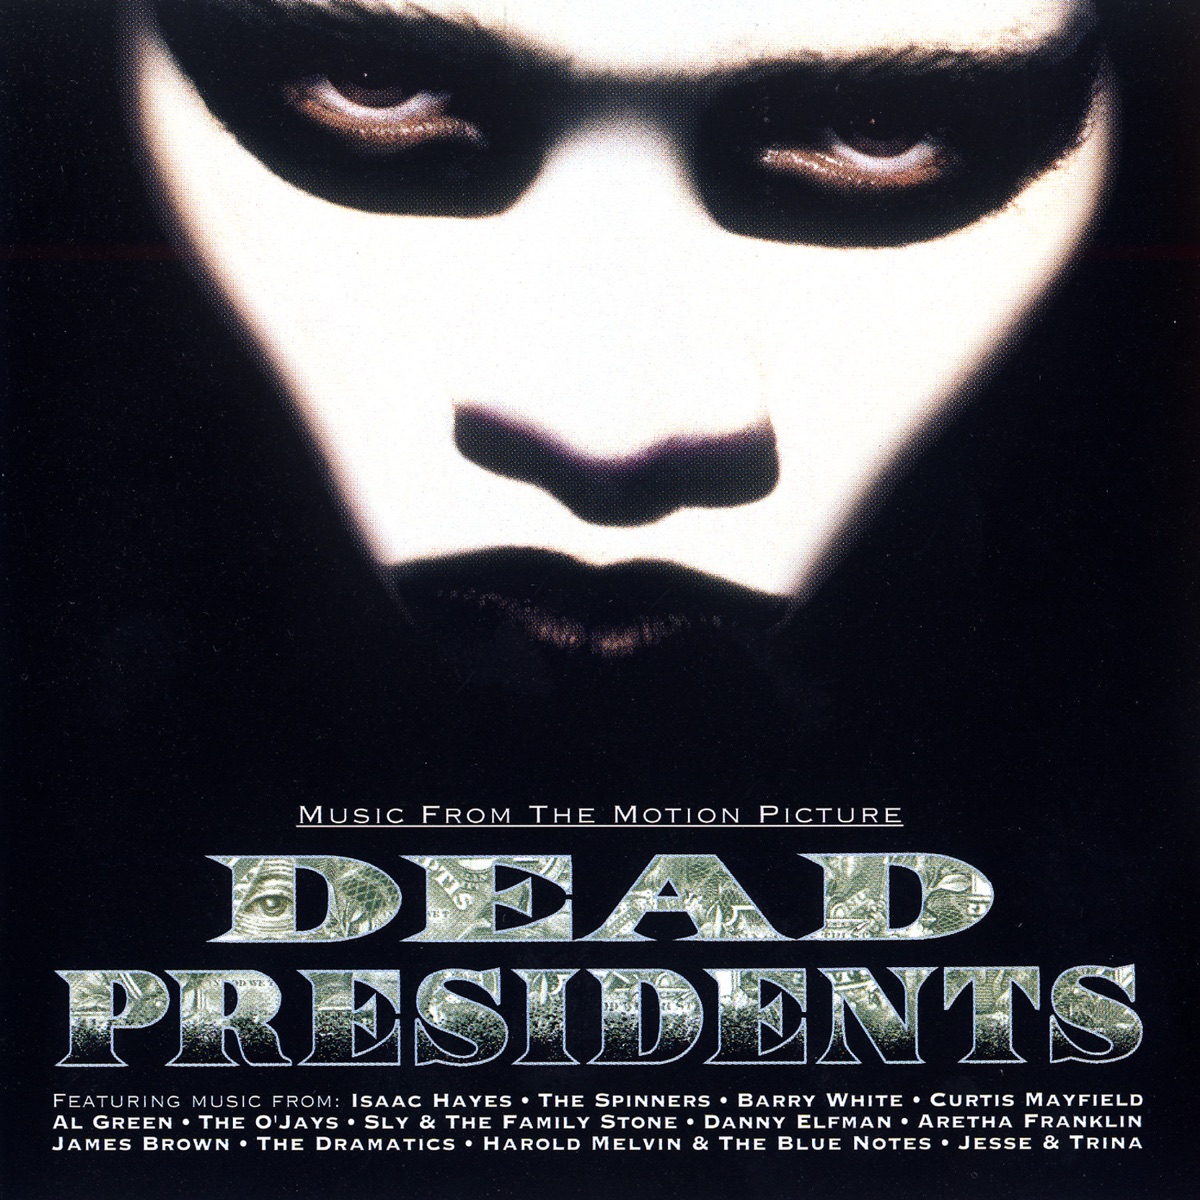 Dead Presidents, Vol. 1 (Music from the Motion Picture) - Album by